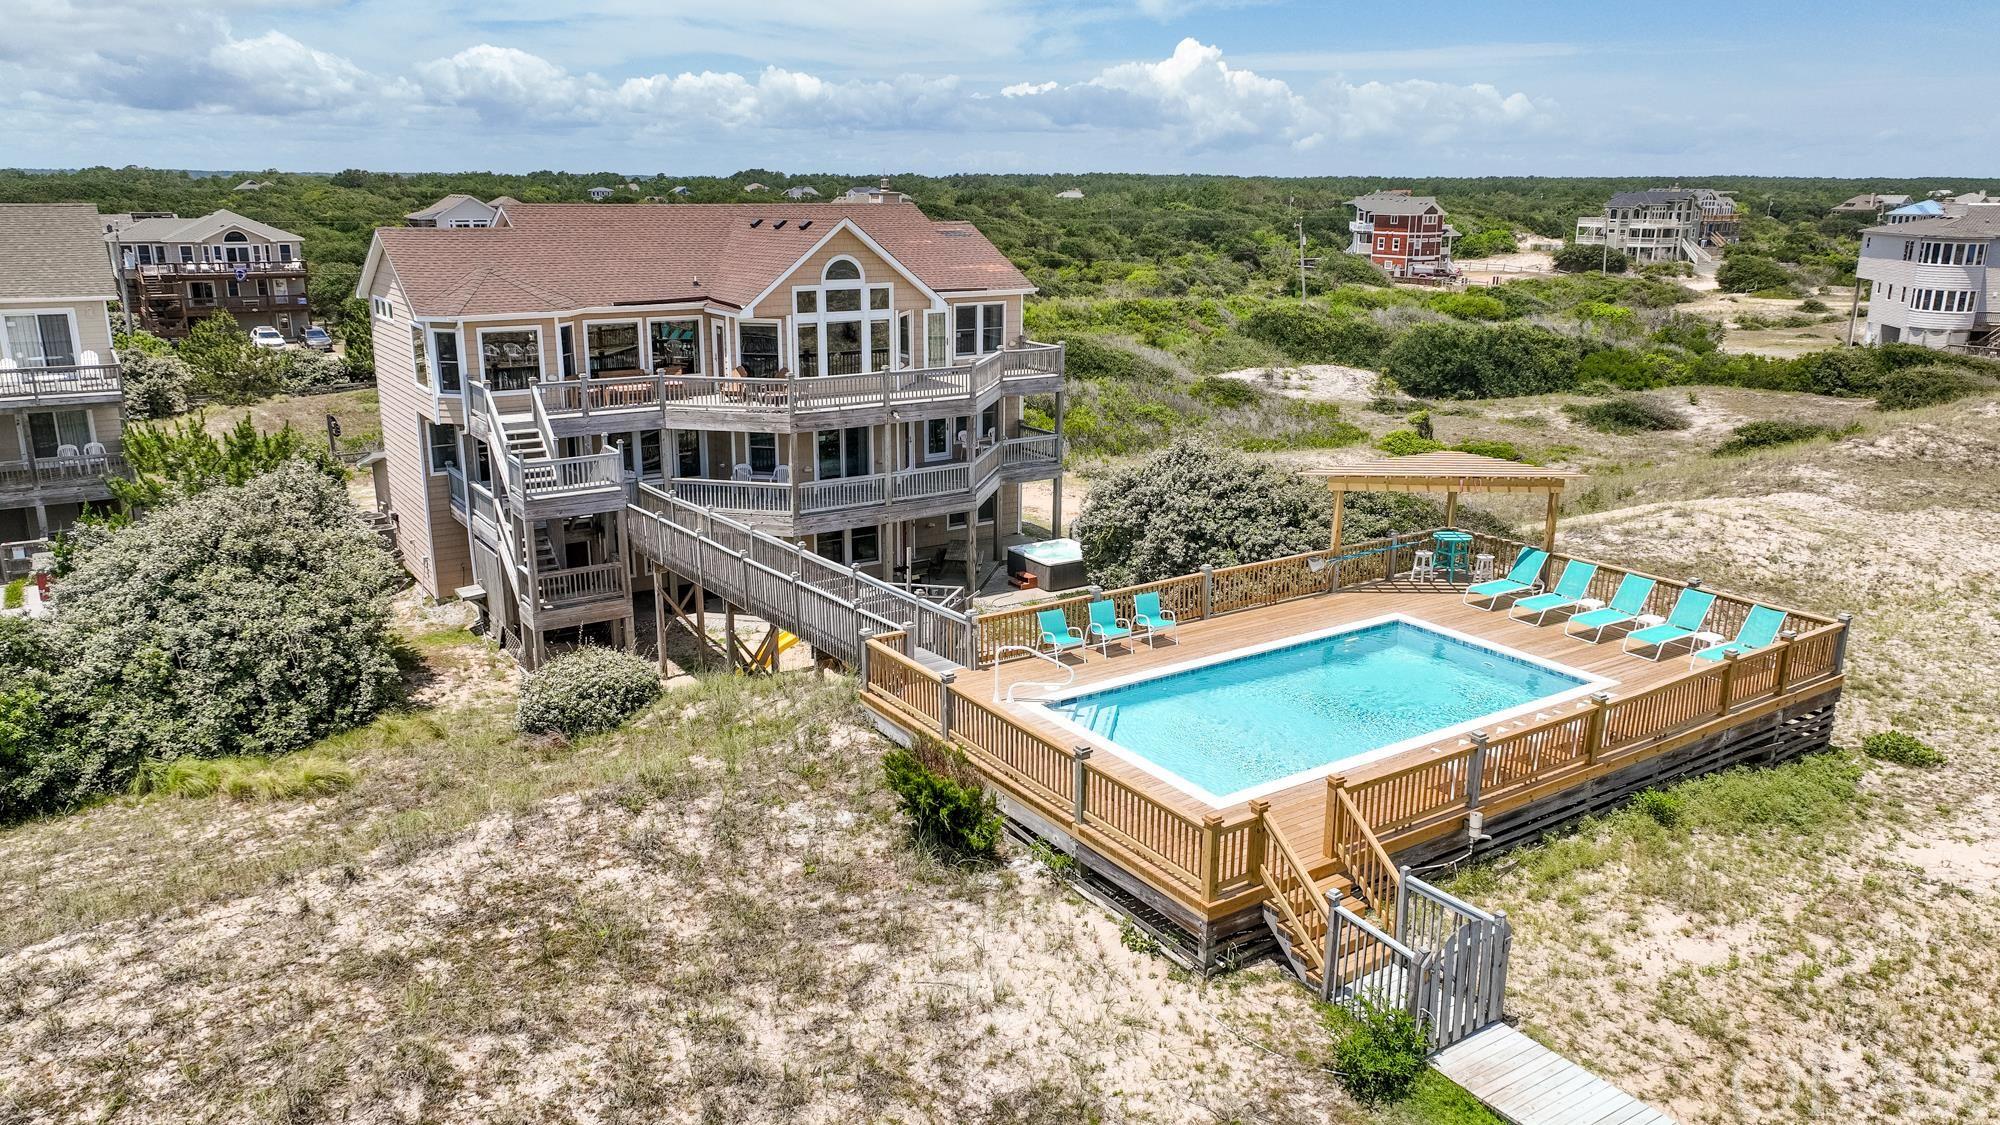 Accessible by 4x4 only, this custom built 8BR/8.5BA thoughtfully designed oceanfront retreat boasts spectacular ocean views and every conceivable amenity for the discerning buyer. On the top floor, the first of six master bedrooms w/fireplace, whirlpool tub, & deck access, an open concept living room w/entertainment center & gas fireplace, a half bath, dining room seating 20, a large tiled kitchen w/raised counter seating for 4, two dishwashers & a breakfast nook, a west side ships watch for sunset views, and eastside sun decks facing the sea. On the middle level, an entry foyer, four more master bedrooms (one handicap friendly), a bedroom, den/office, full hall bath, covered decks, a spacious elevated gated deck w/private pool, and a private walkway to the beach. On the ground level, another master bedroom, a bedroom, full hall bath, gameroom w/pool table, foosball & wet bar, ELEVATOR, laundry room, covered decks, hot tub, and pirate ship playground.  Currently this home is utilized as a vacation rental with considerable in-season owner use as well.  Full season rental projection on file for 2023 of $145,000 owner gross.  This home is a must see!